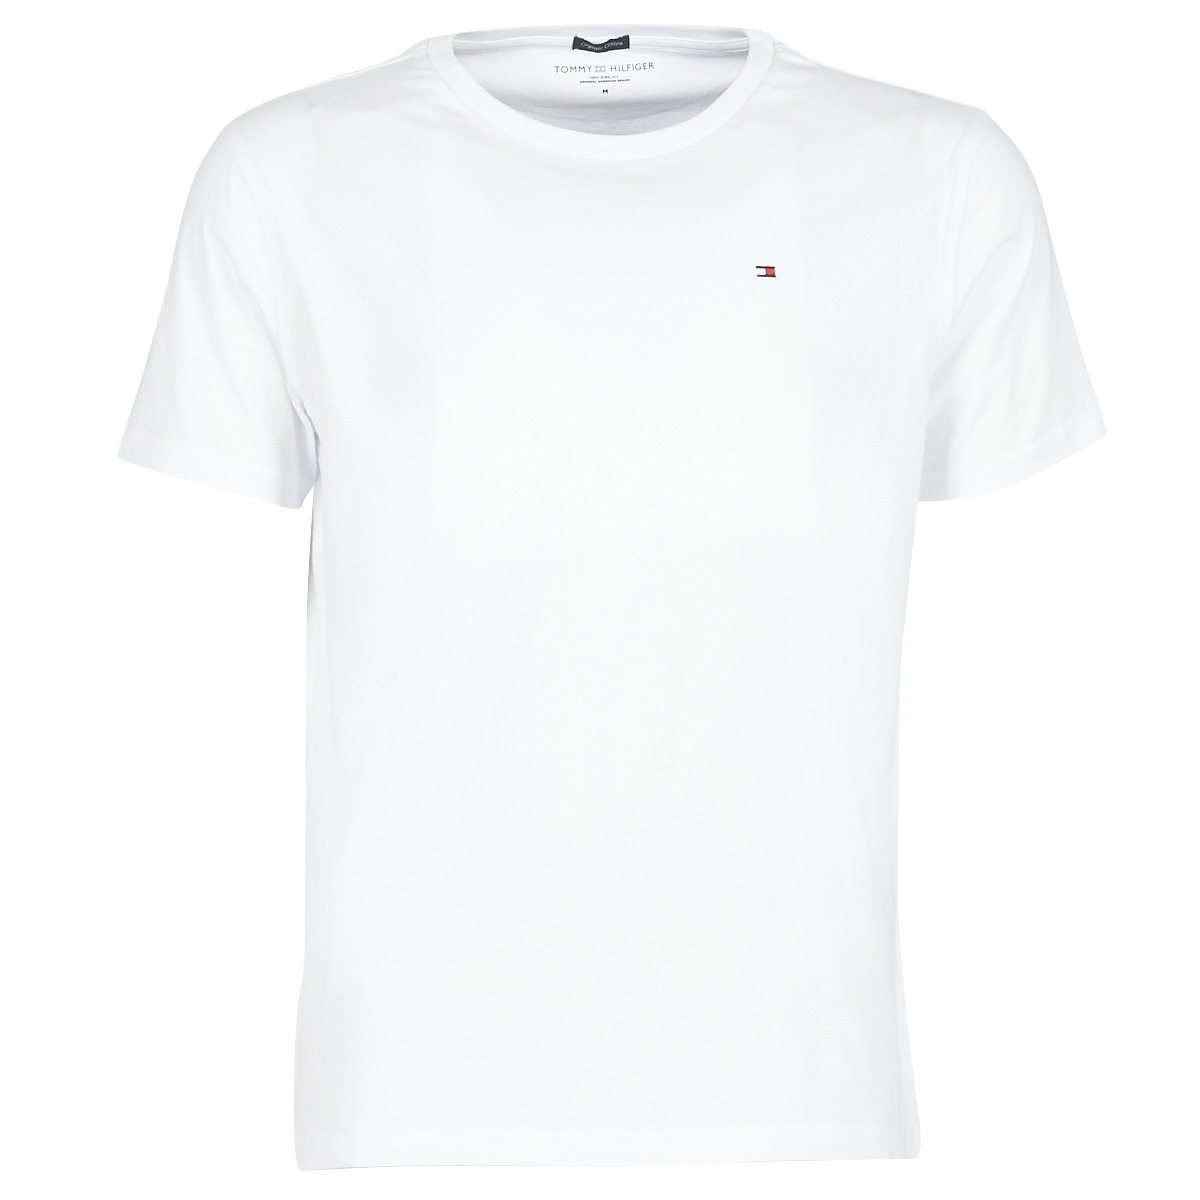 at fortsætte Surichinmoi Pirat Tommy Hilfiger COTTON ICON SLEEPWEAR-2S87904671 White - Free delivery |  Spartoo NET ! - Clothing short-sleeved t-shirts Men USD/$42.50